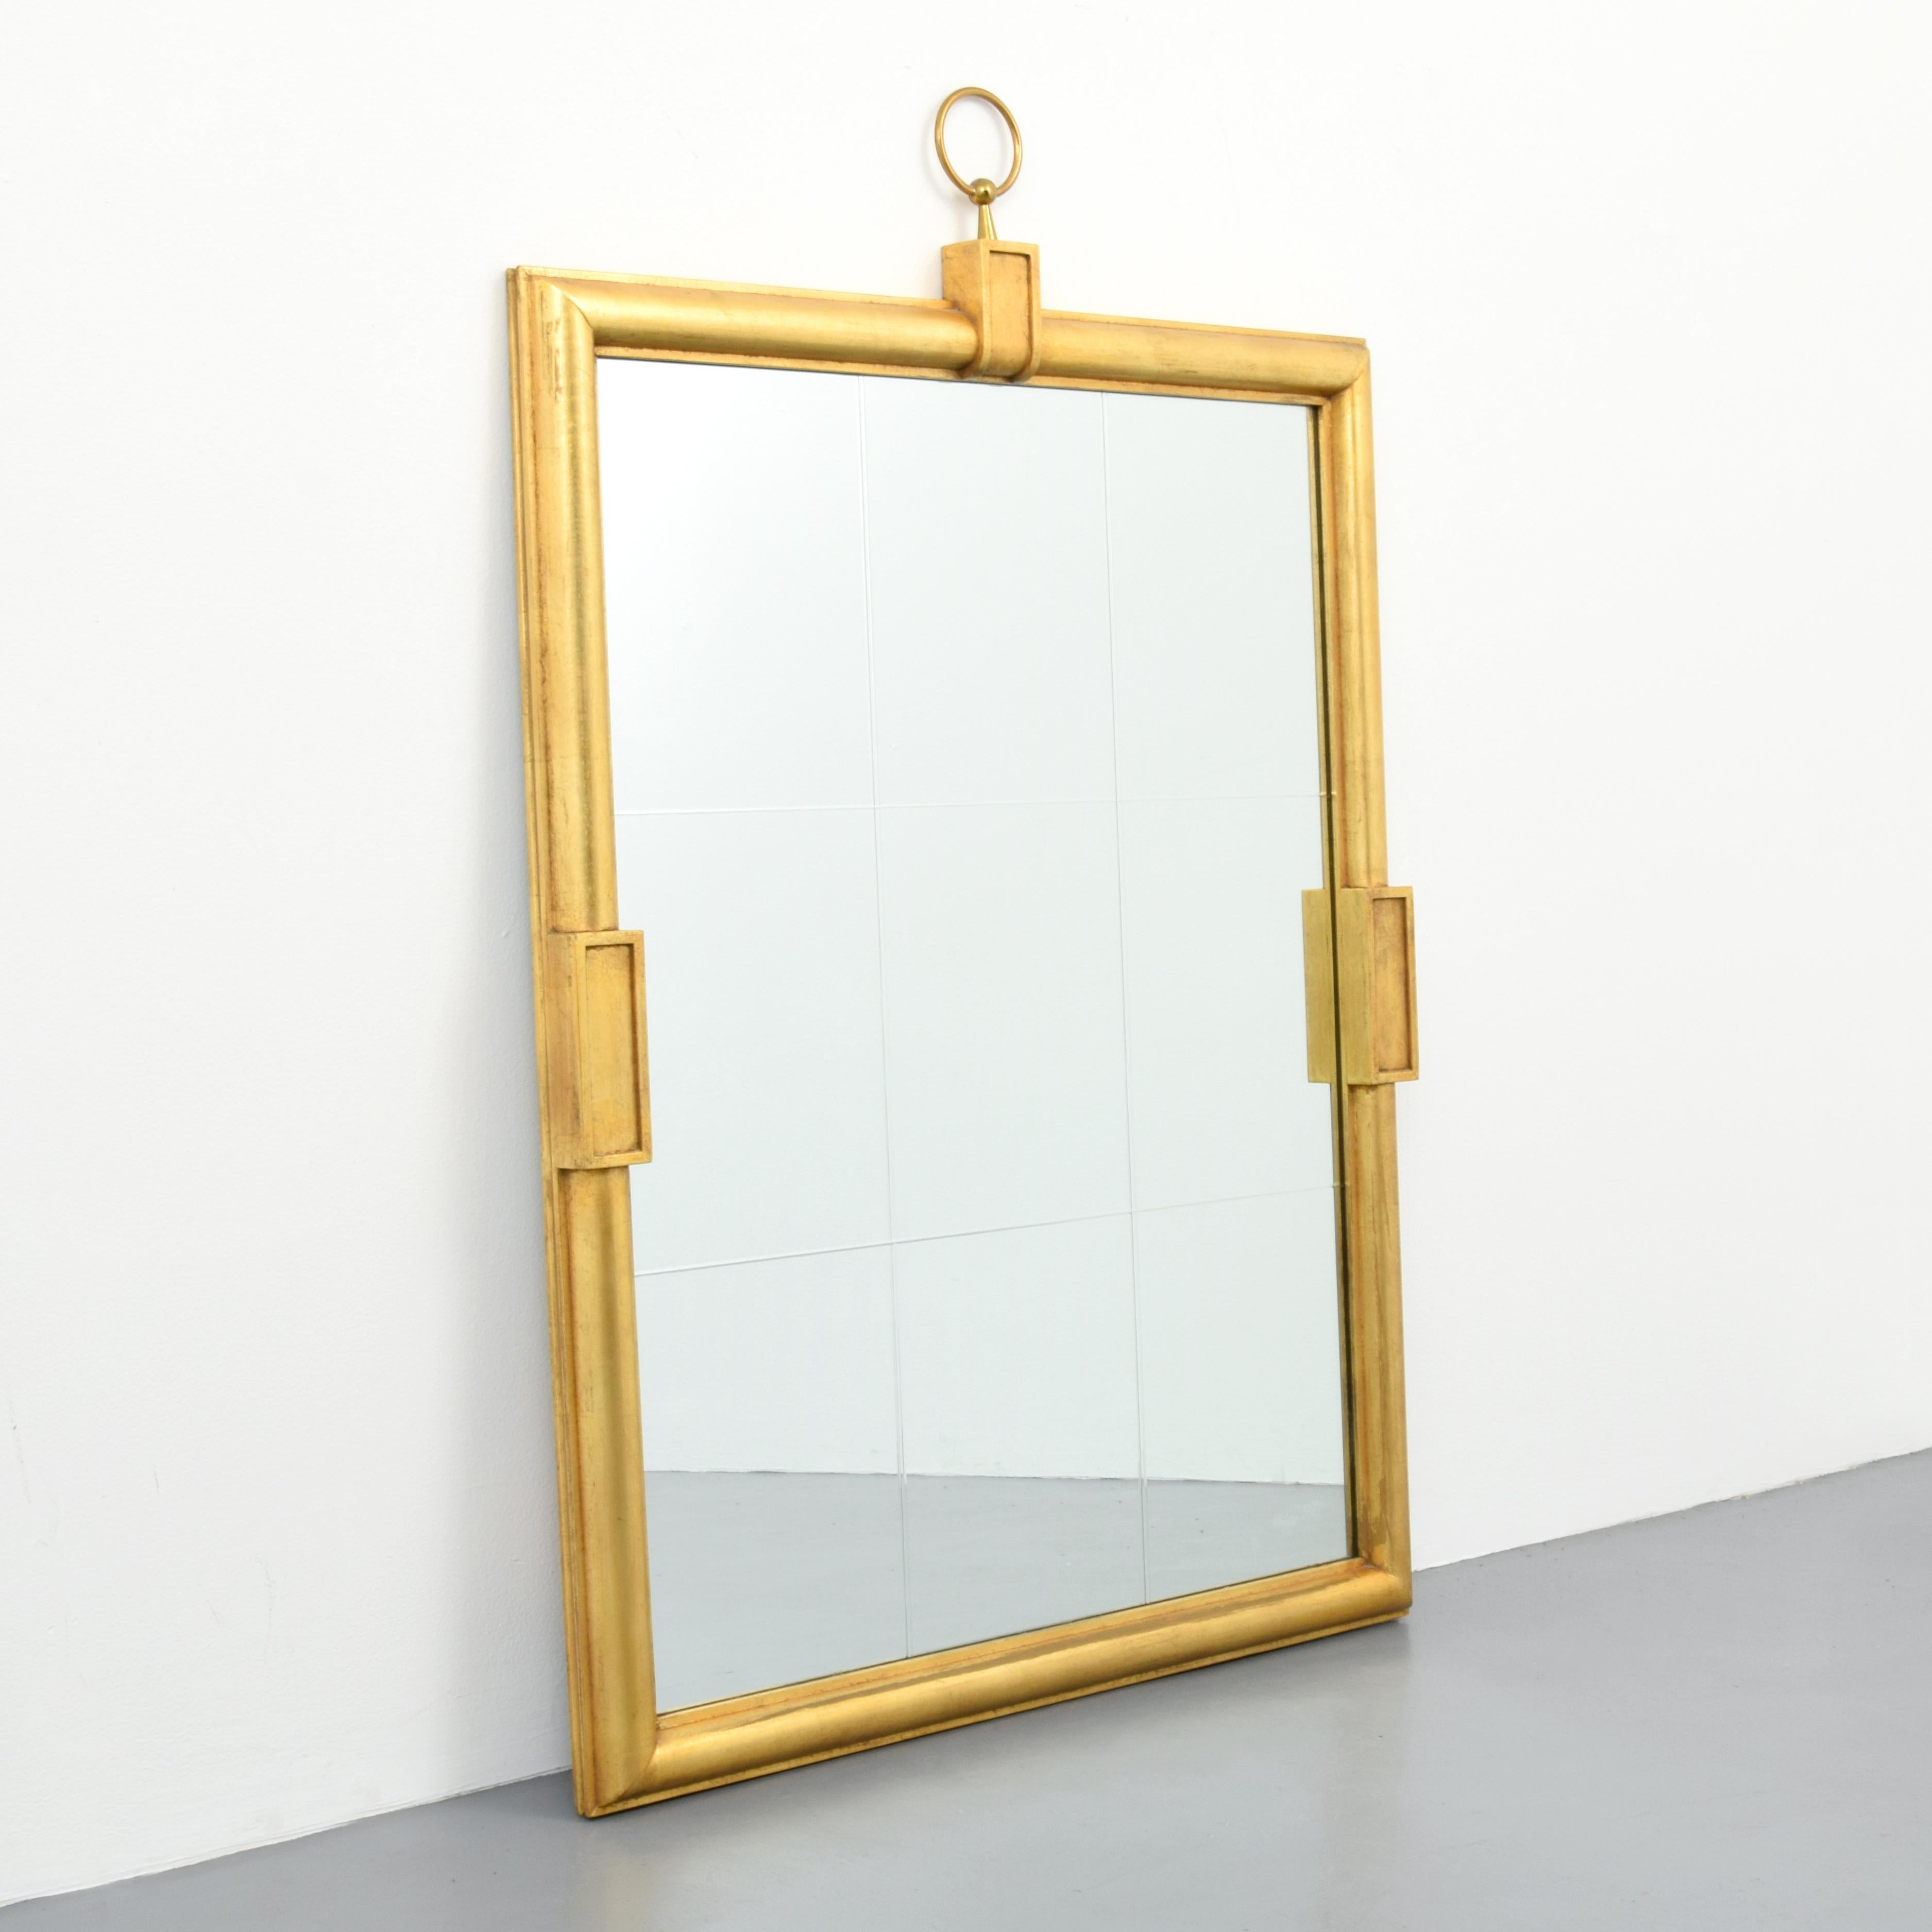 Large miror by Tommi Parzinger for Parzinger Originals.

Tommi Parzinger's meticulous detail in his early work as a silversmith was carried over into his design career.  He favored costly materials that allowed him to achieve a luxurious and elegant